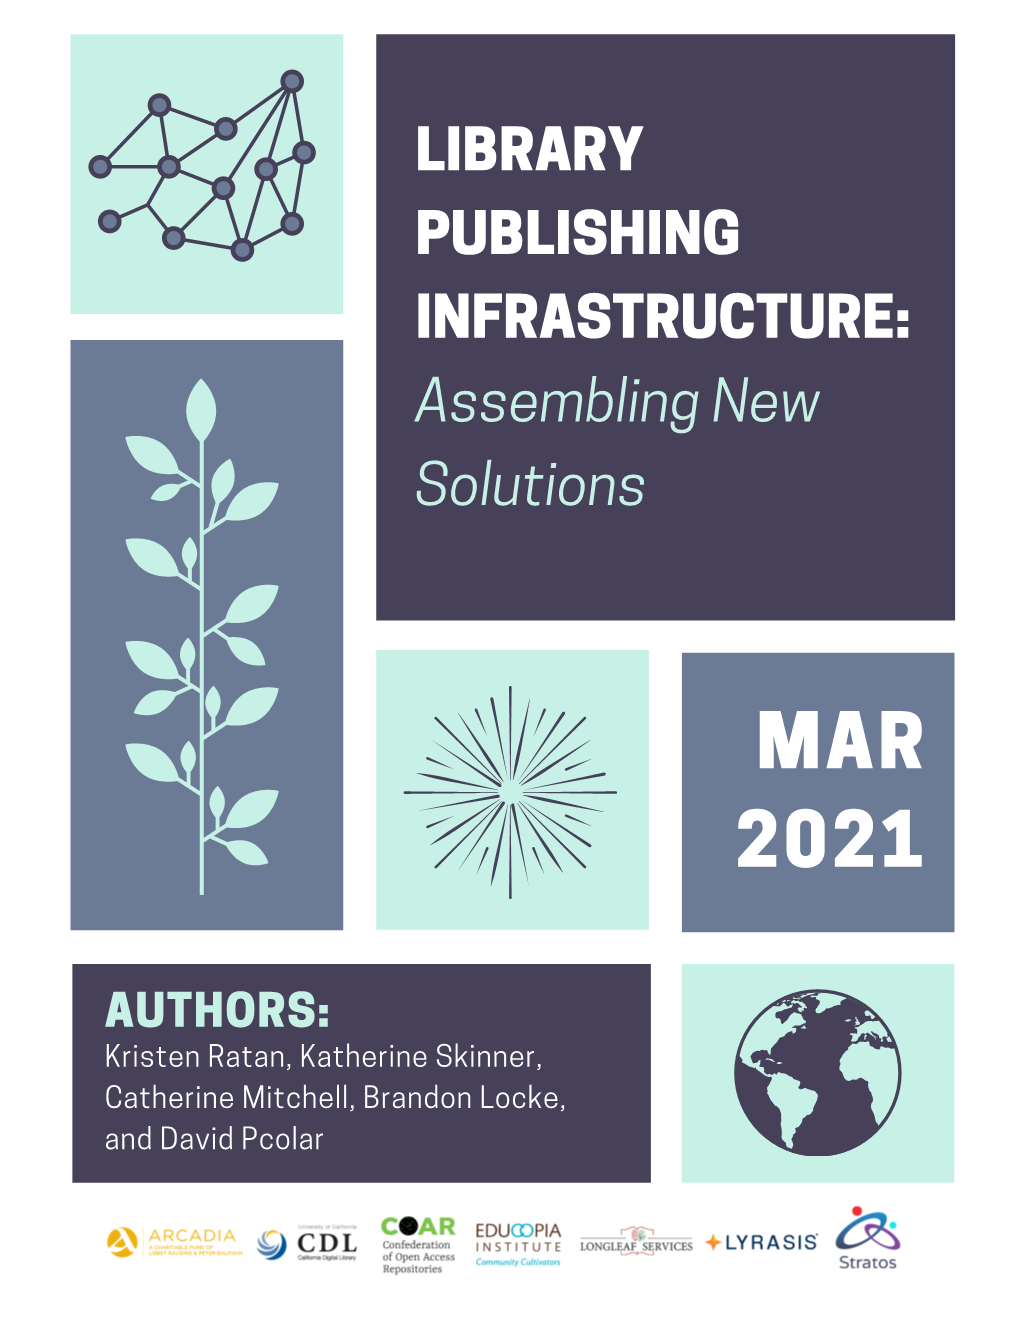 LIBRARY PUBLISHING INFRASTRUCTURE: Assembling New Solutions